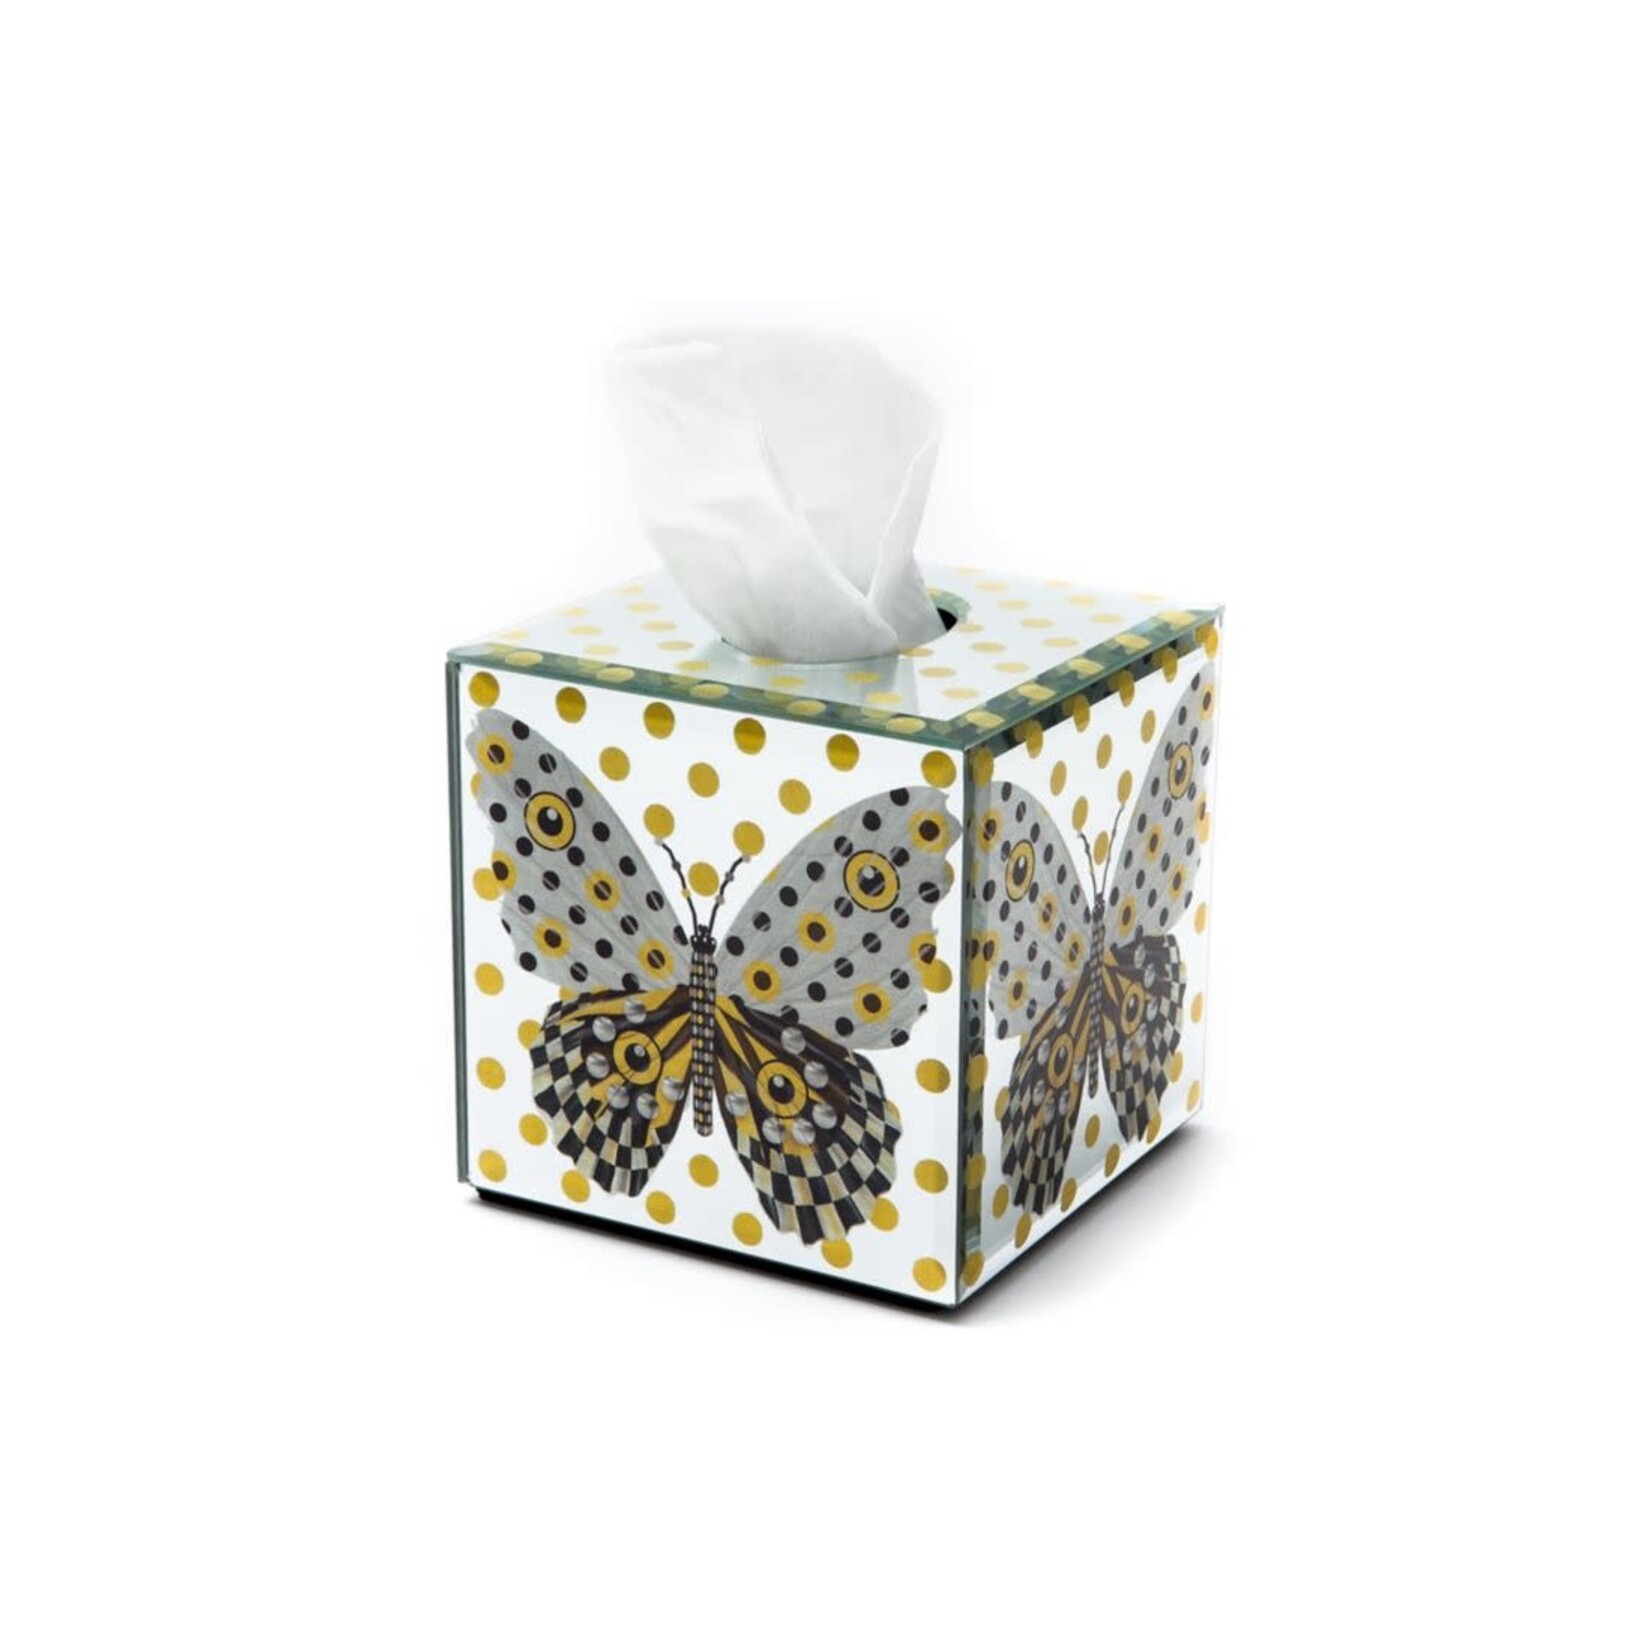 MacKenzie-Childs Spot on Butterfly Boutique Tissue Box Cover